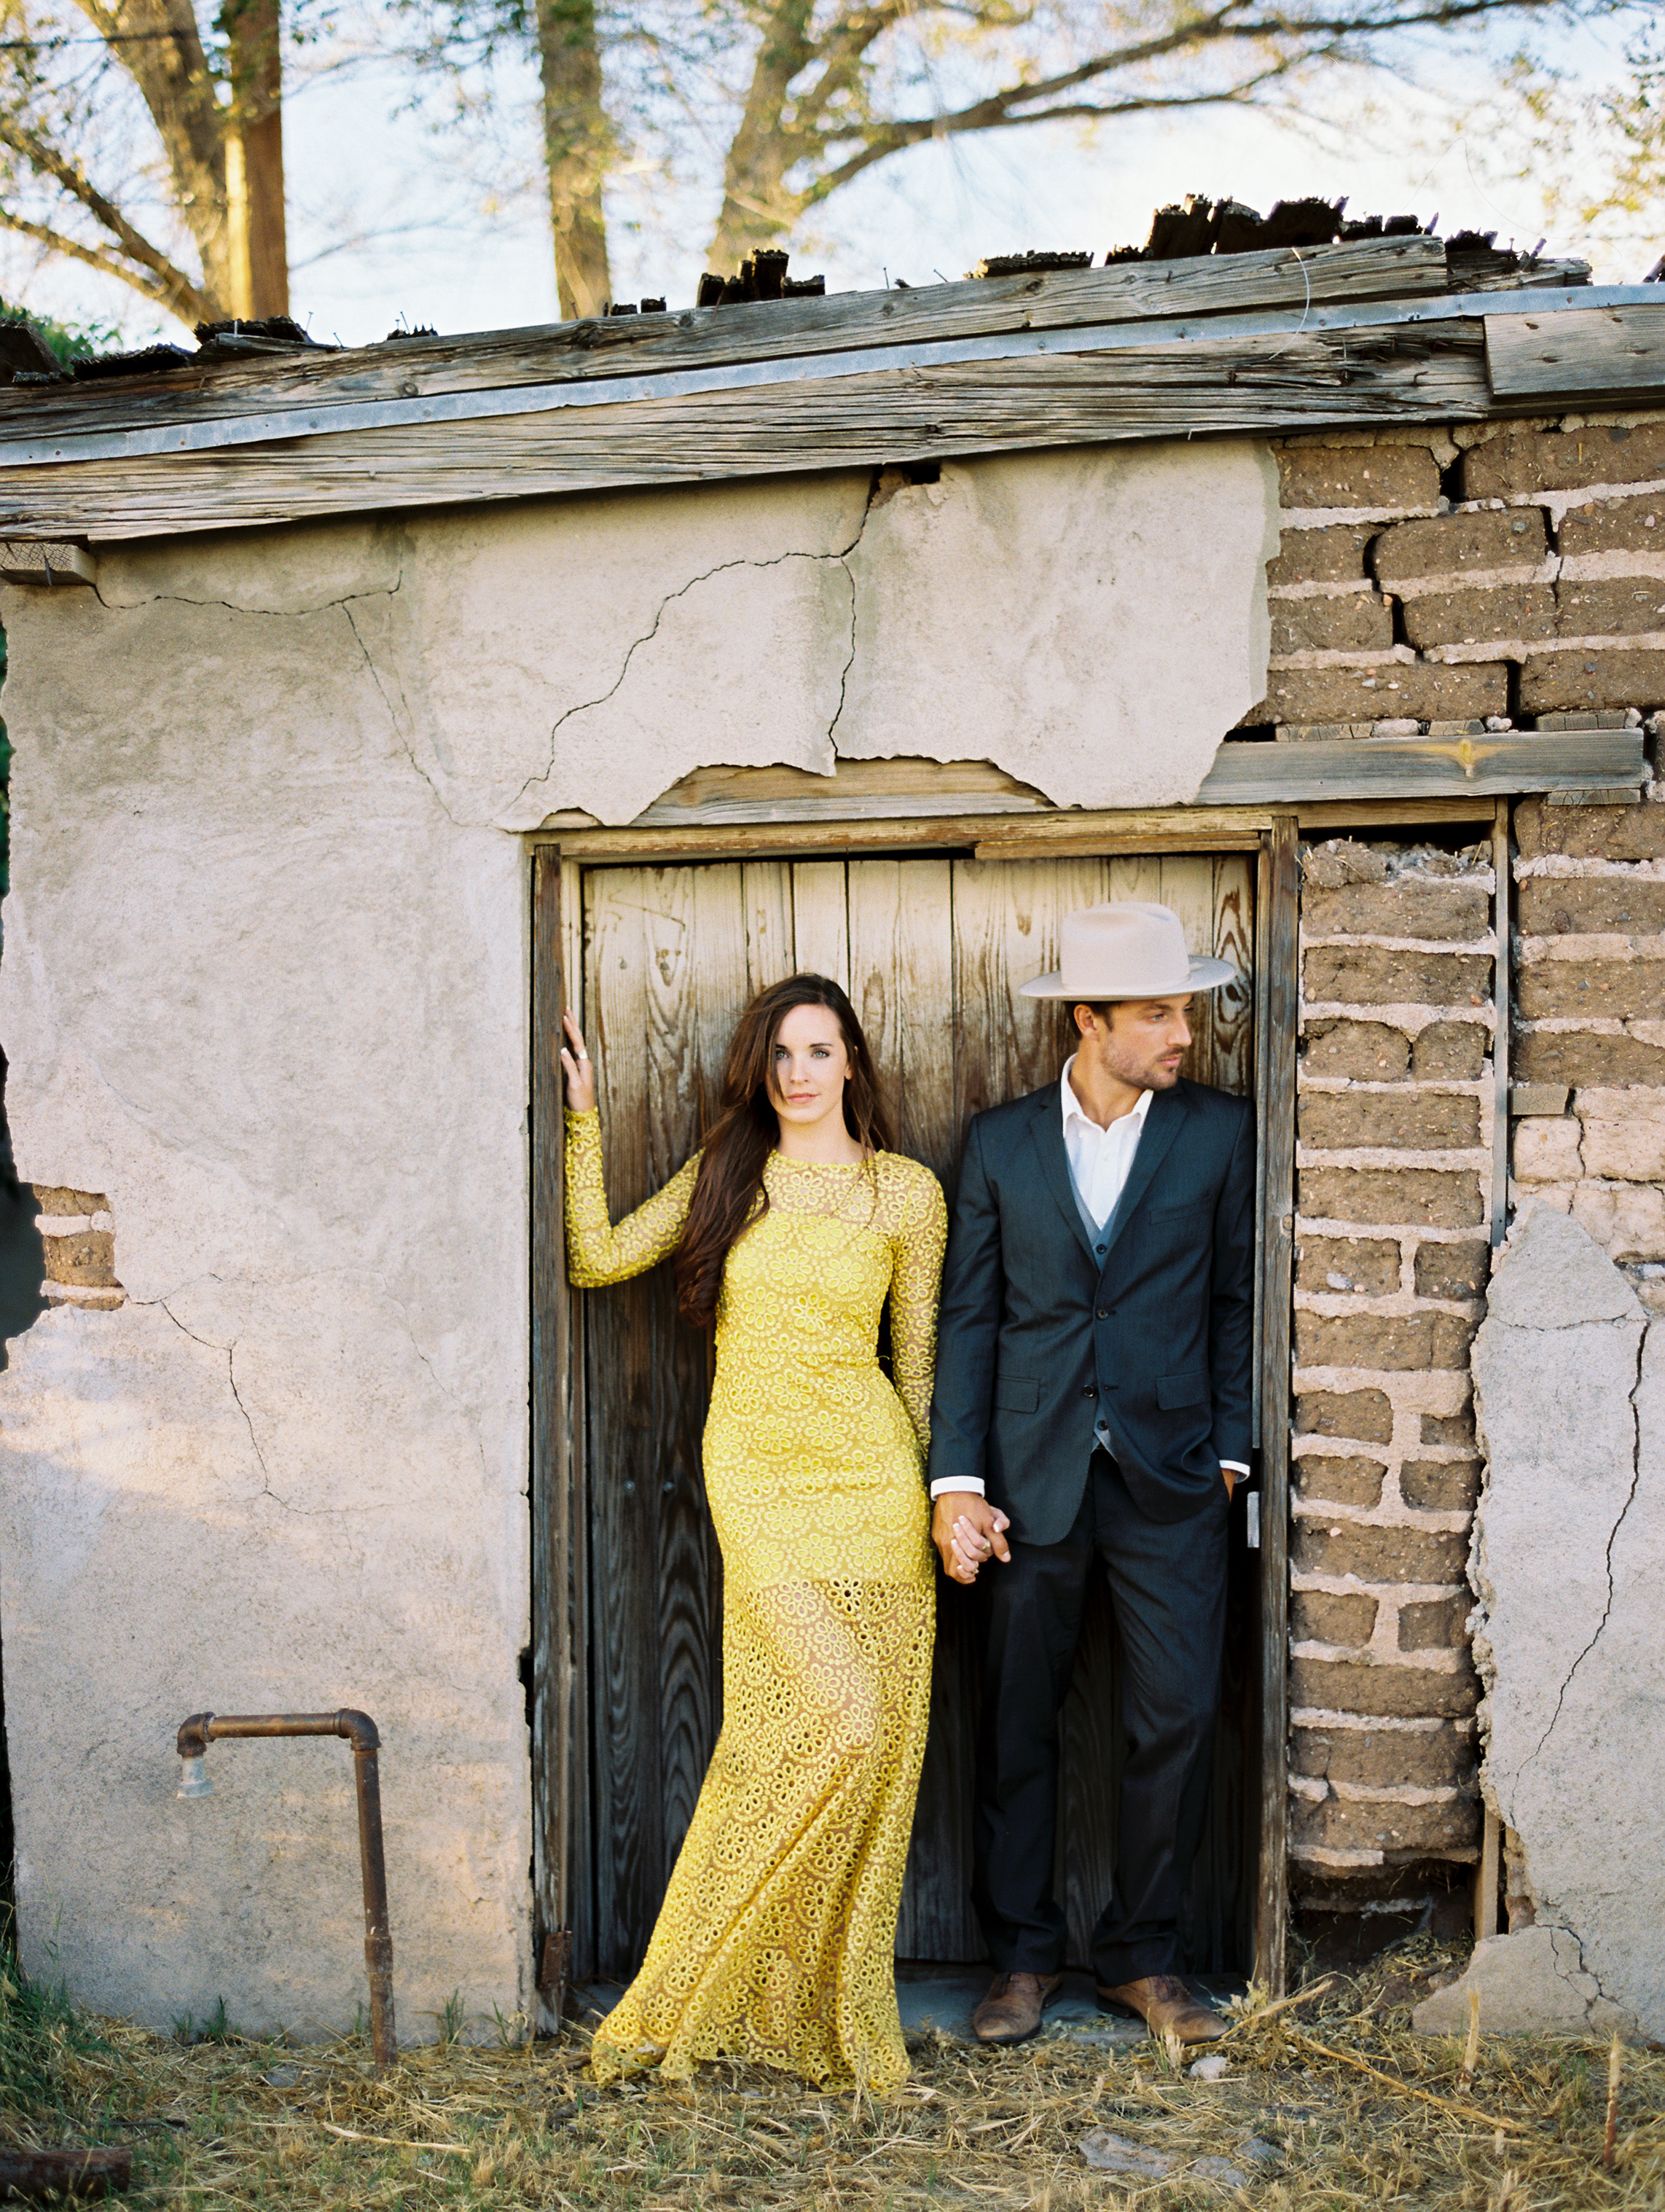 woman in yellow dress holding hands with man in grey suite and cowboy hat standing in wooden doorway engagements in Marfa, Texas.